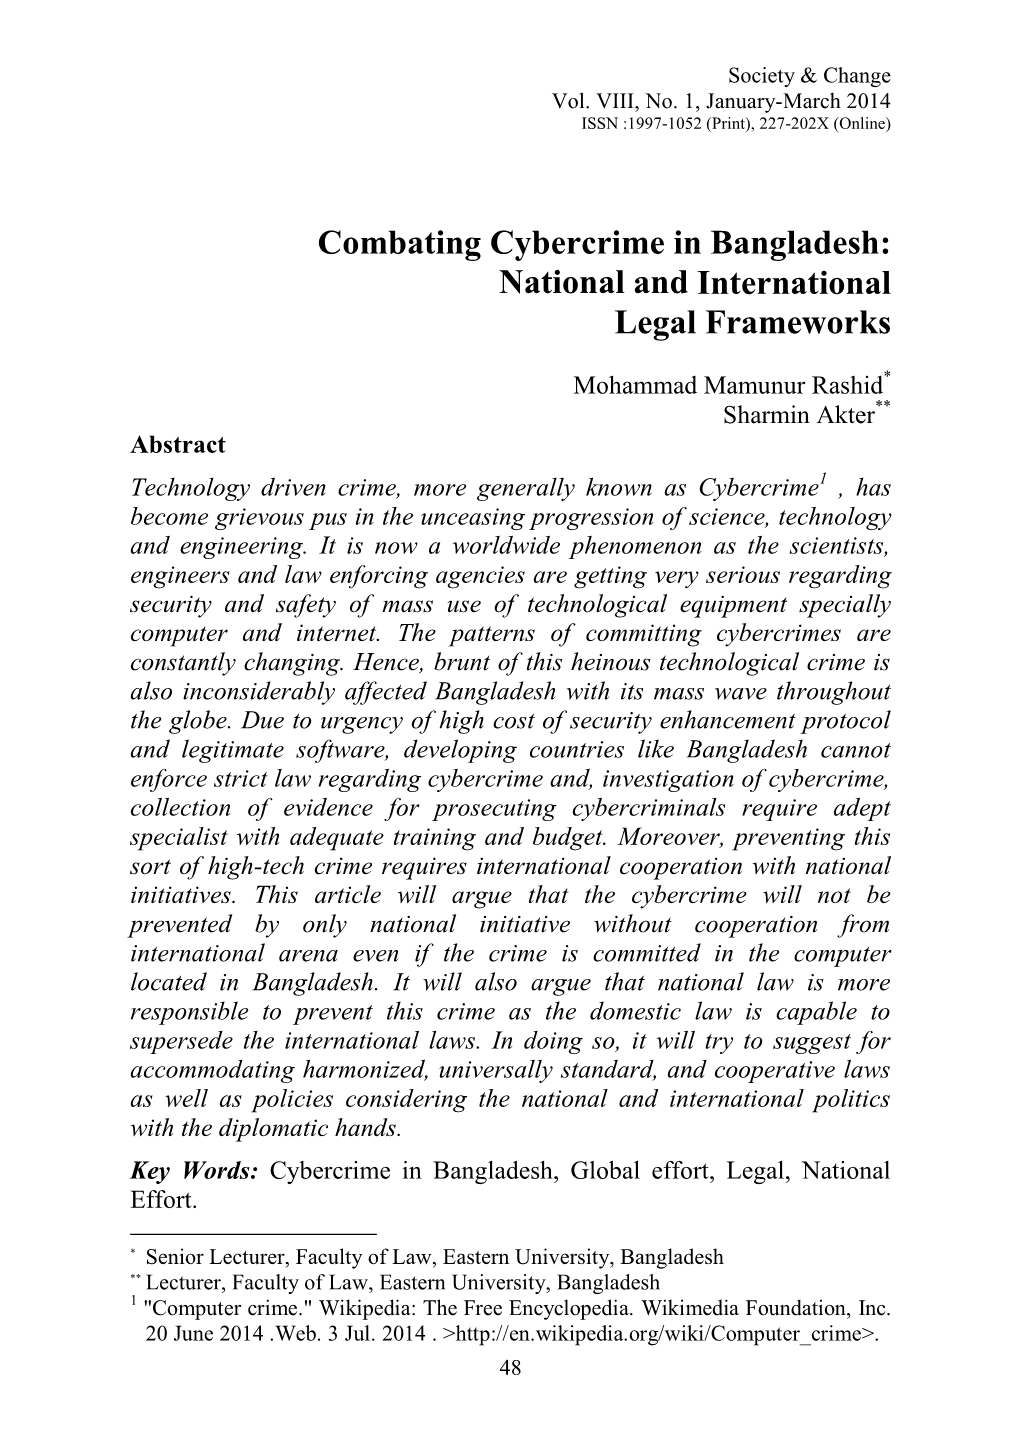 Combating Cybercrime in Bangladesh: National and International Legal Frameworks